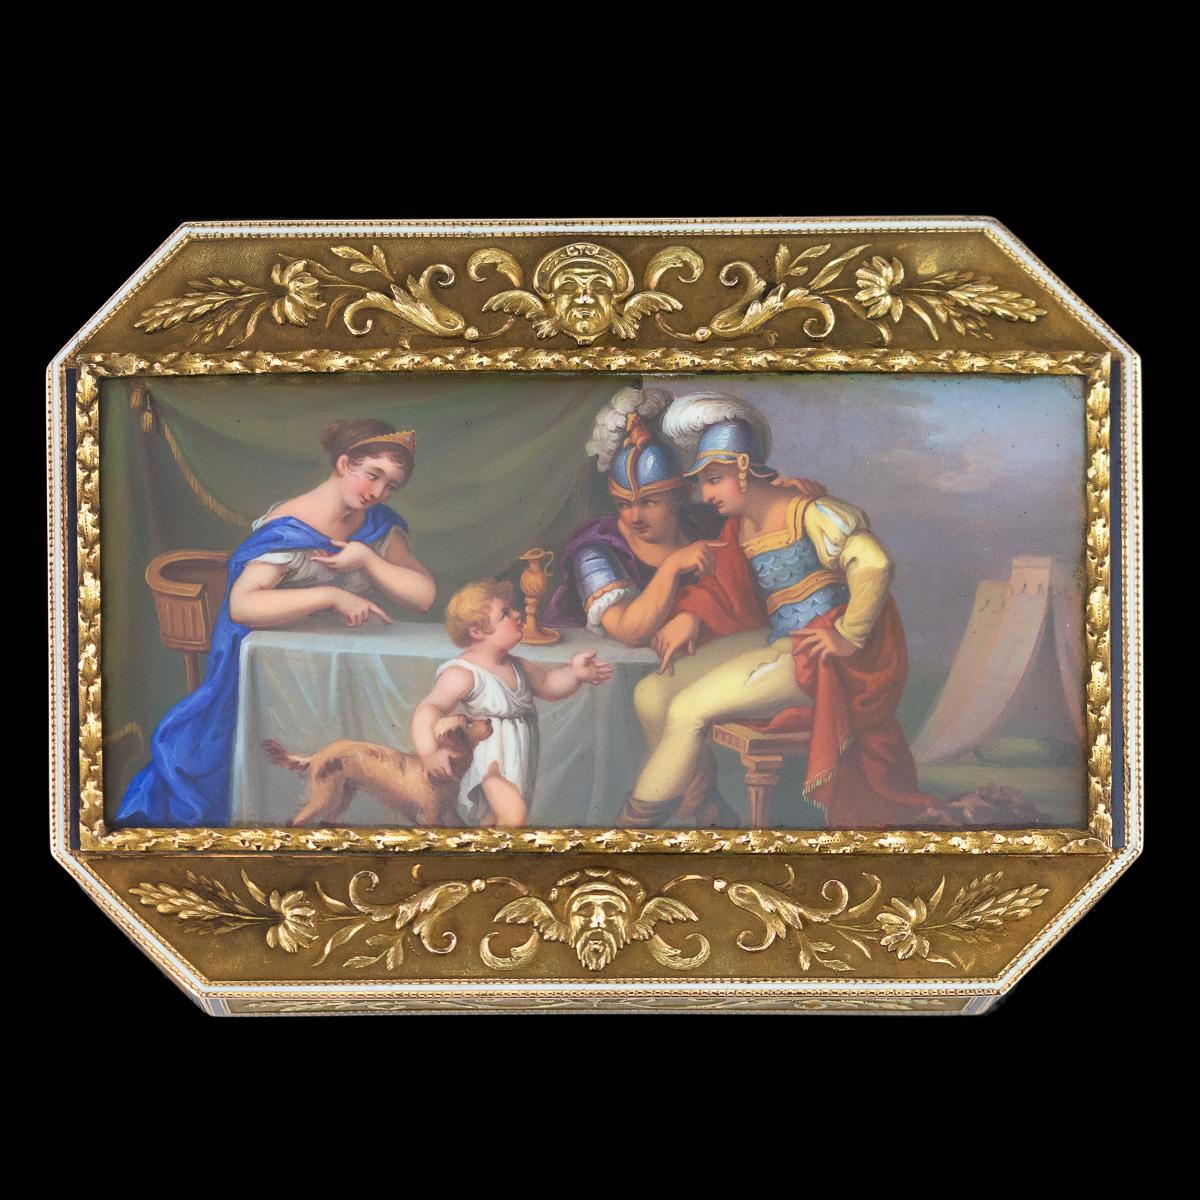 Antique early 19th century Swiss 18-karat gold and enamel snuff box, of rectangular shape with canted corners, the cover set with a finely painted classical enamel panel, depicting battle worn Roman warriors, telling of their heroics to a young